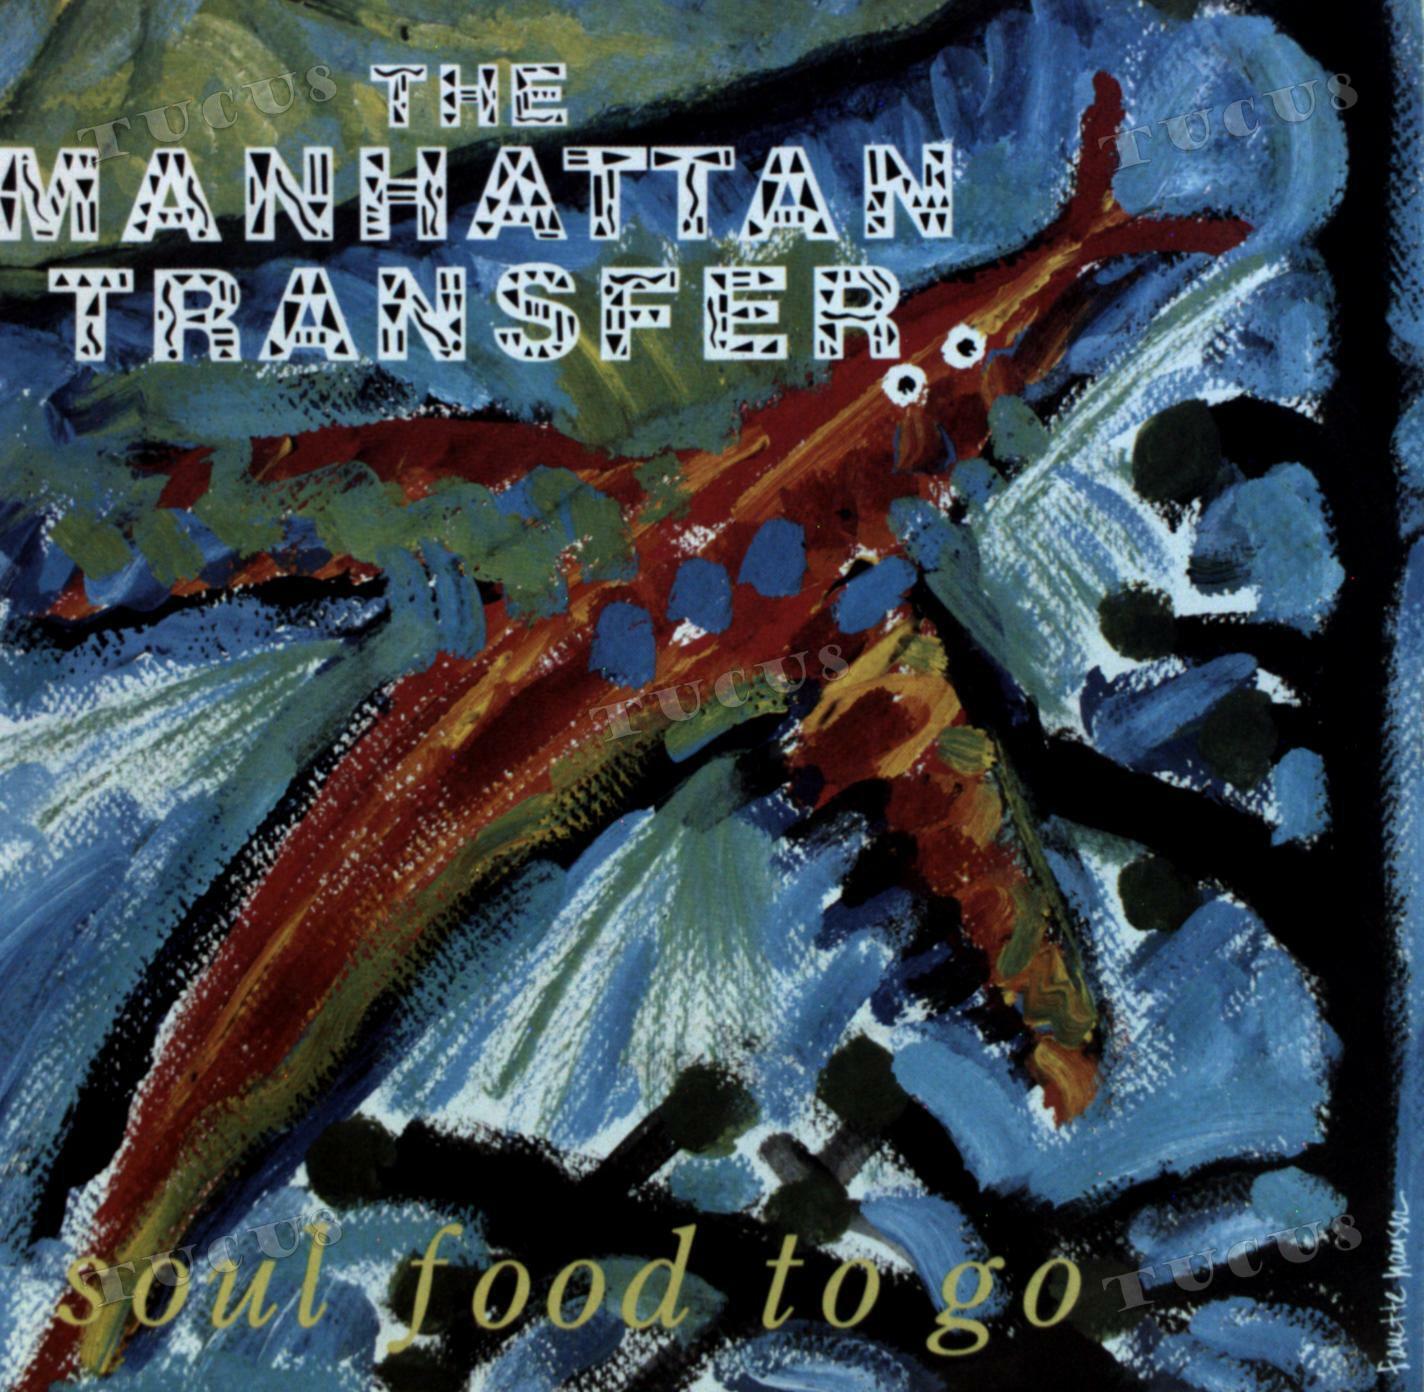 The Manhattan Transfer - Soul Food To Go 7in 1987 (VG+/VG+) '*